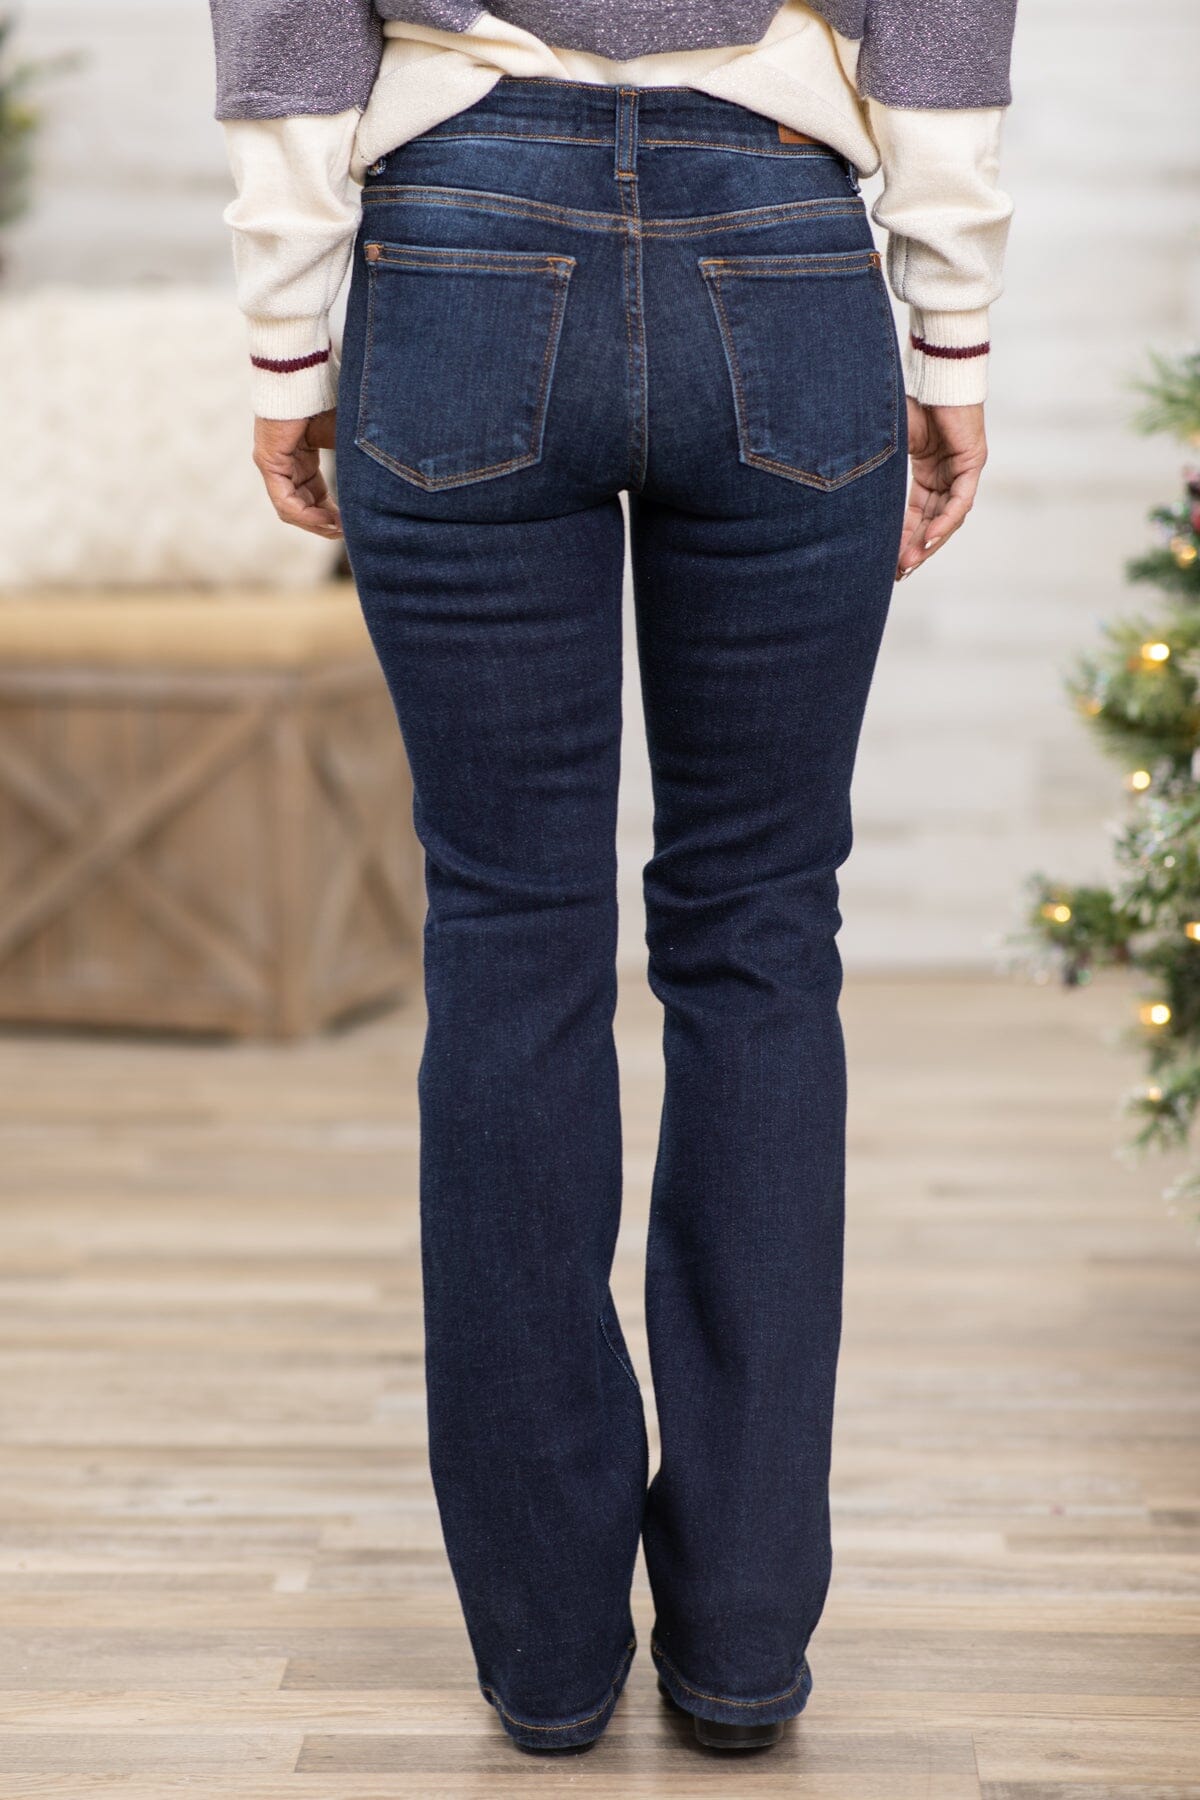 Judy Blue Dark Wash Bootcut Jeans - Filly Flair